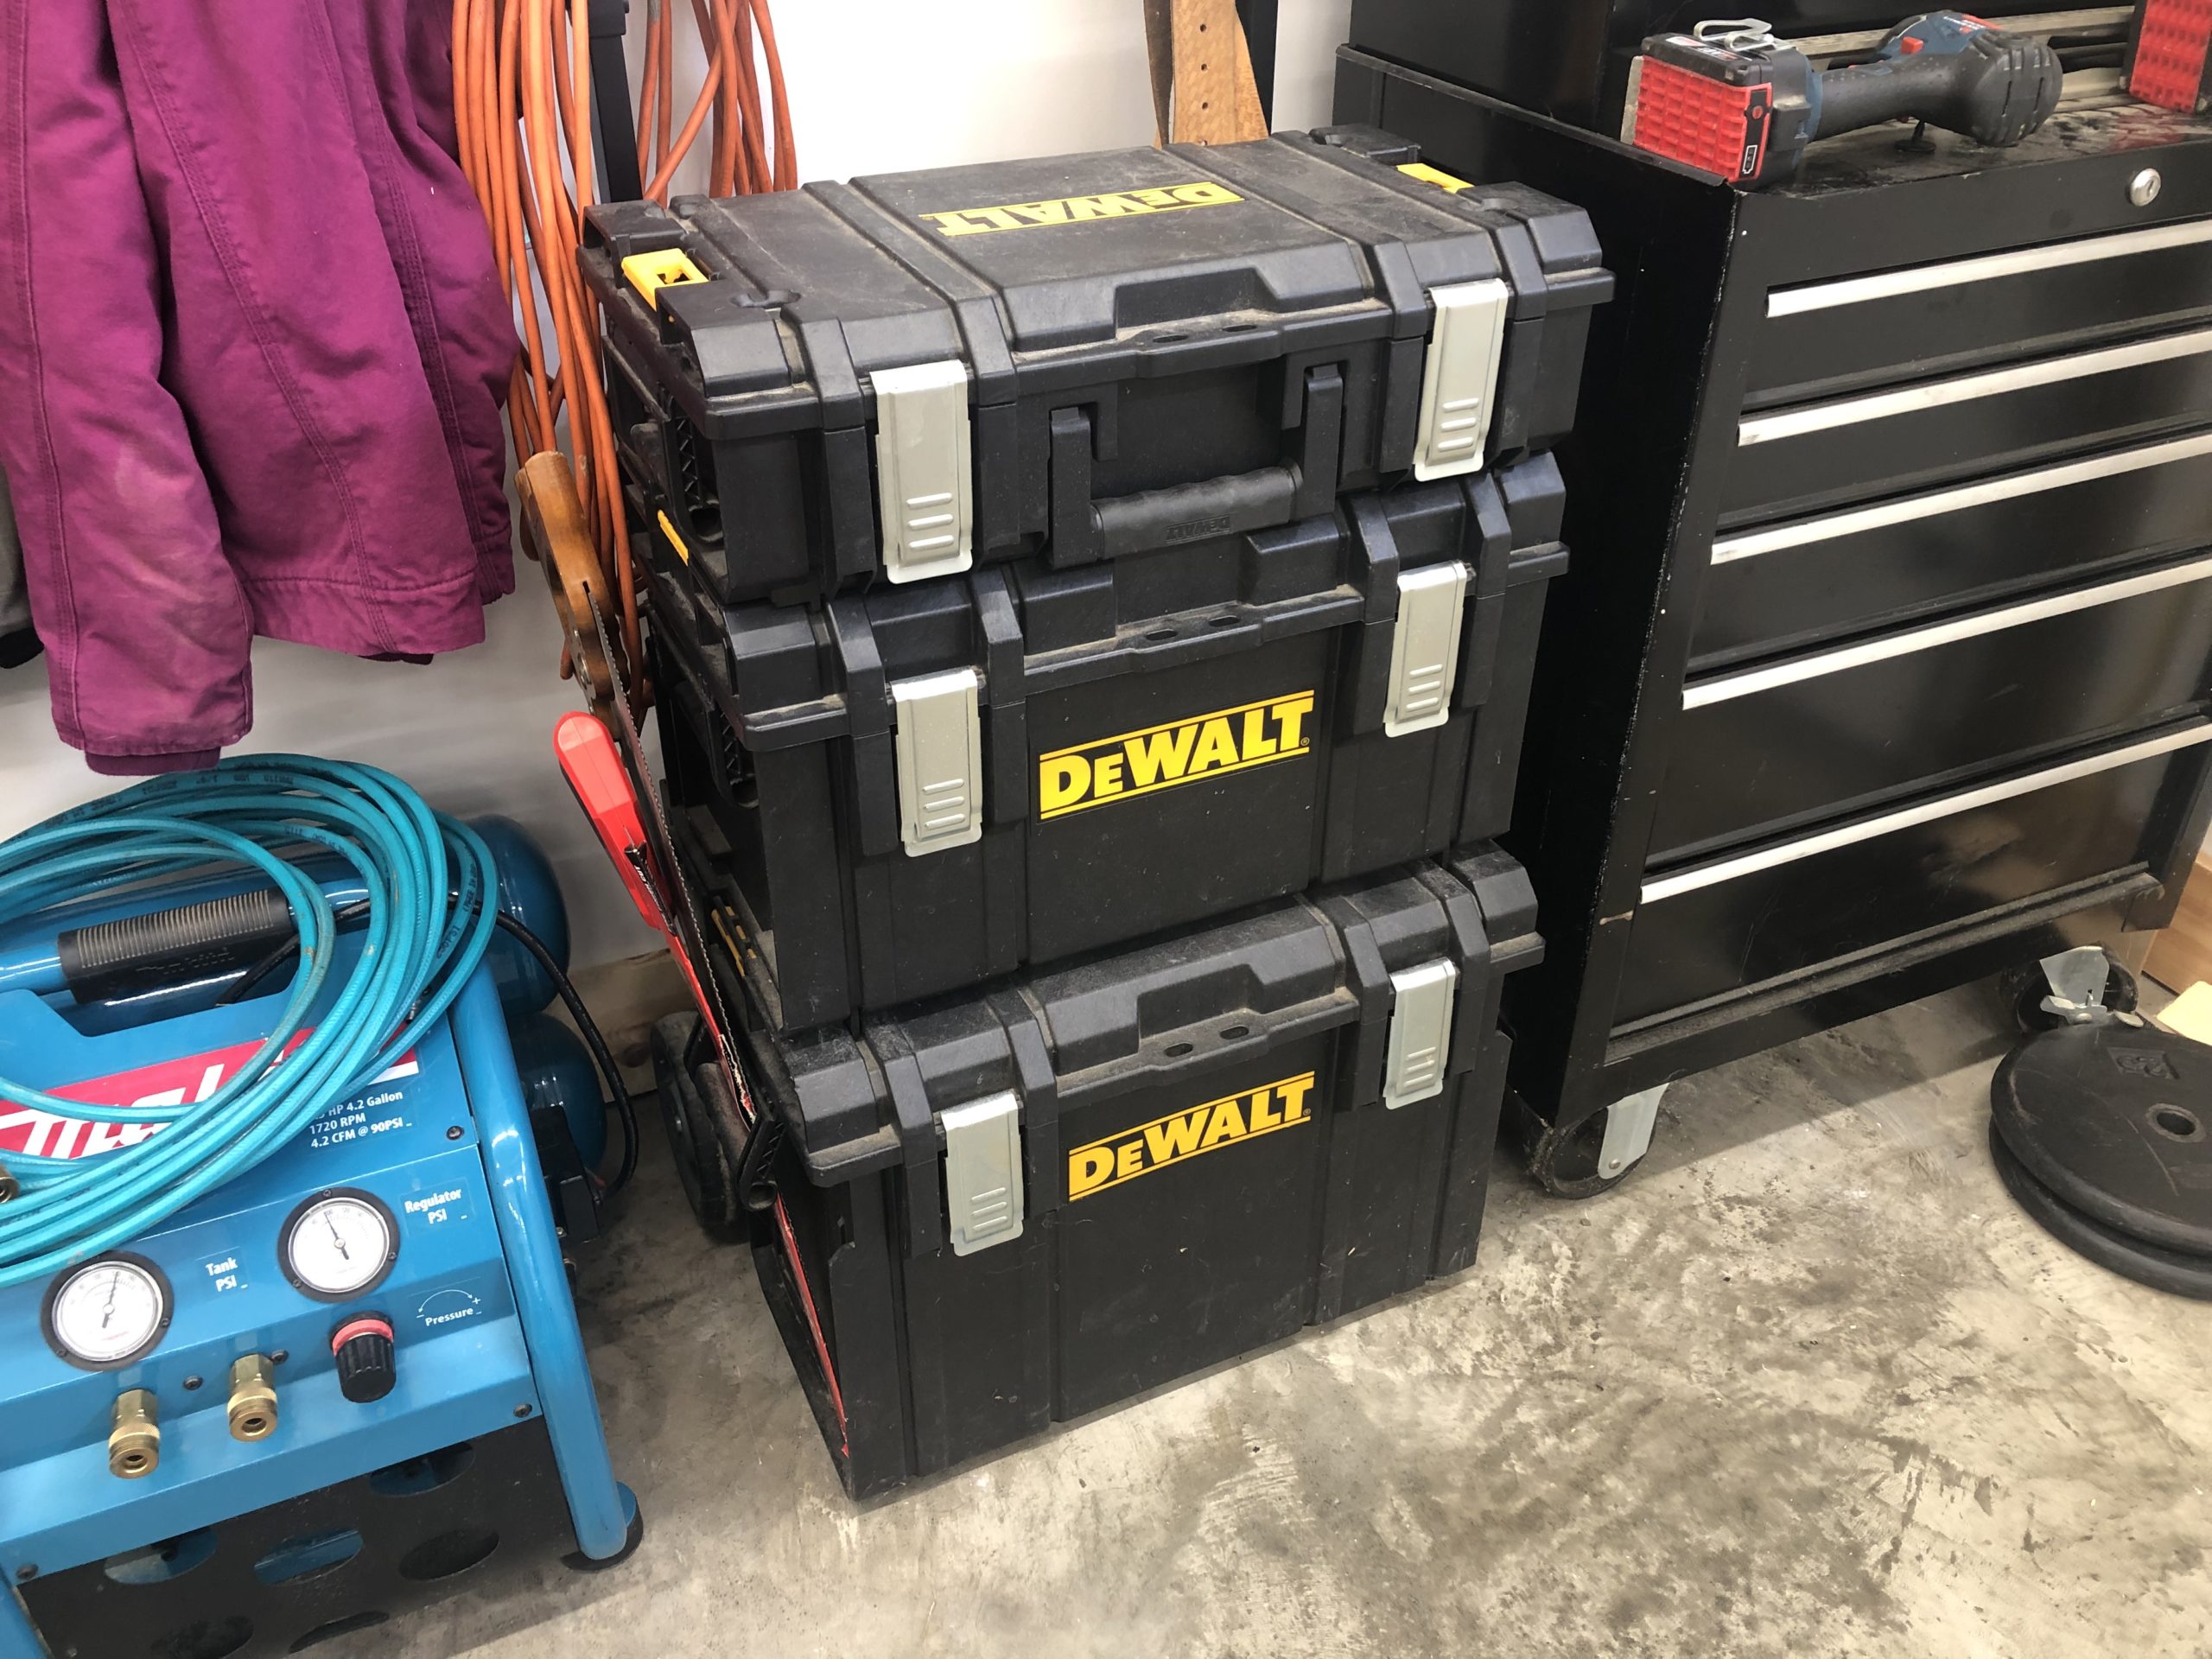 Storing Hand Tools in Portable Toolboxes